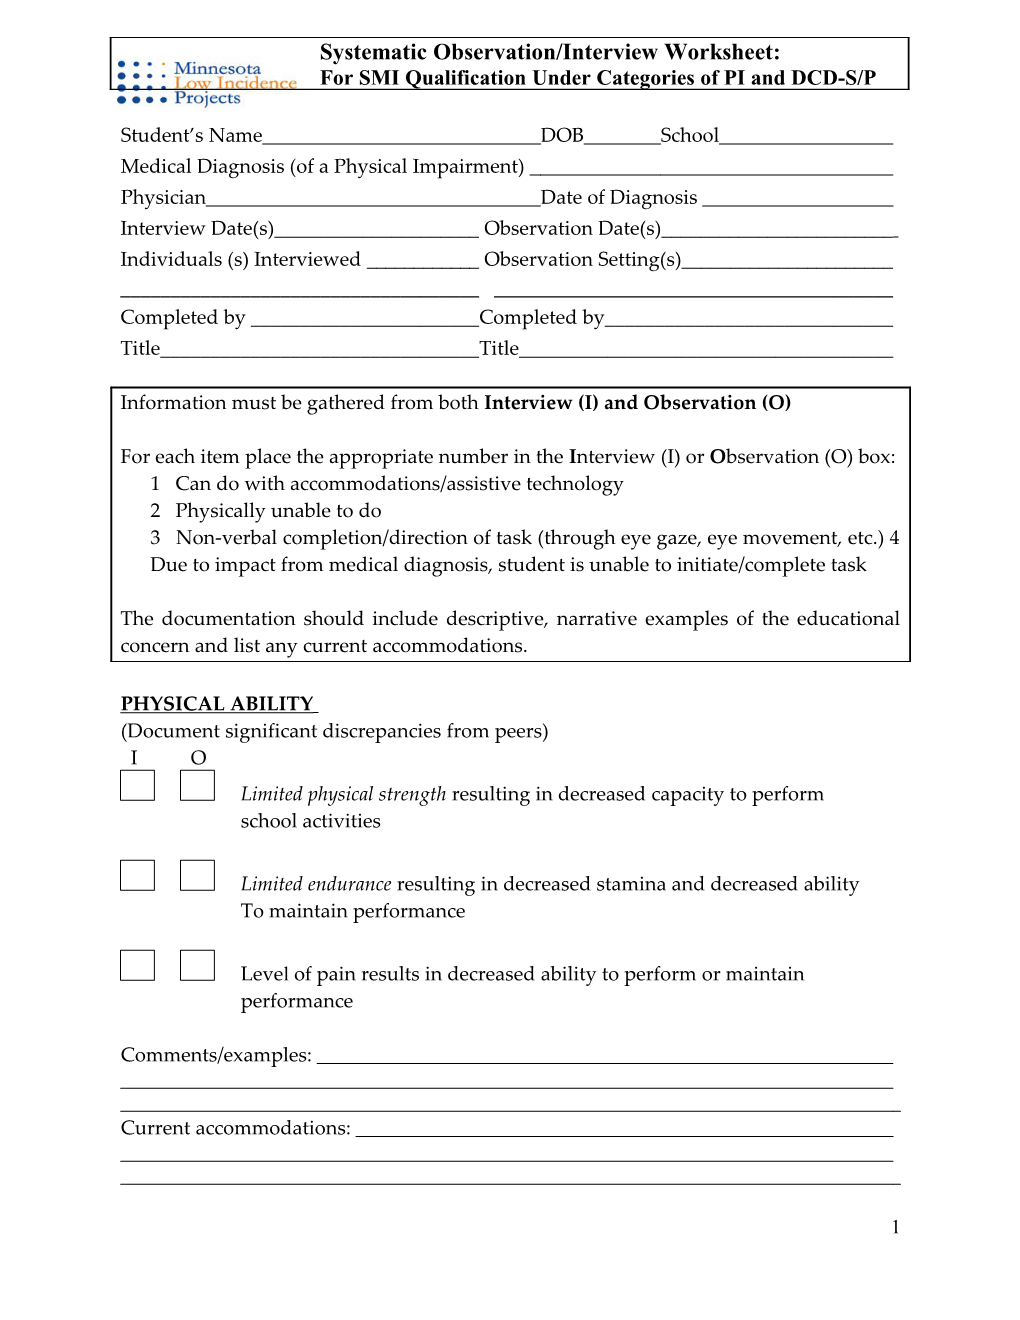 Systematic Interview/Observation Worksheet